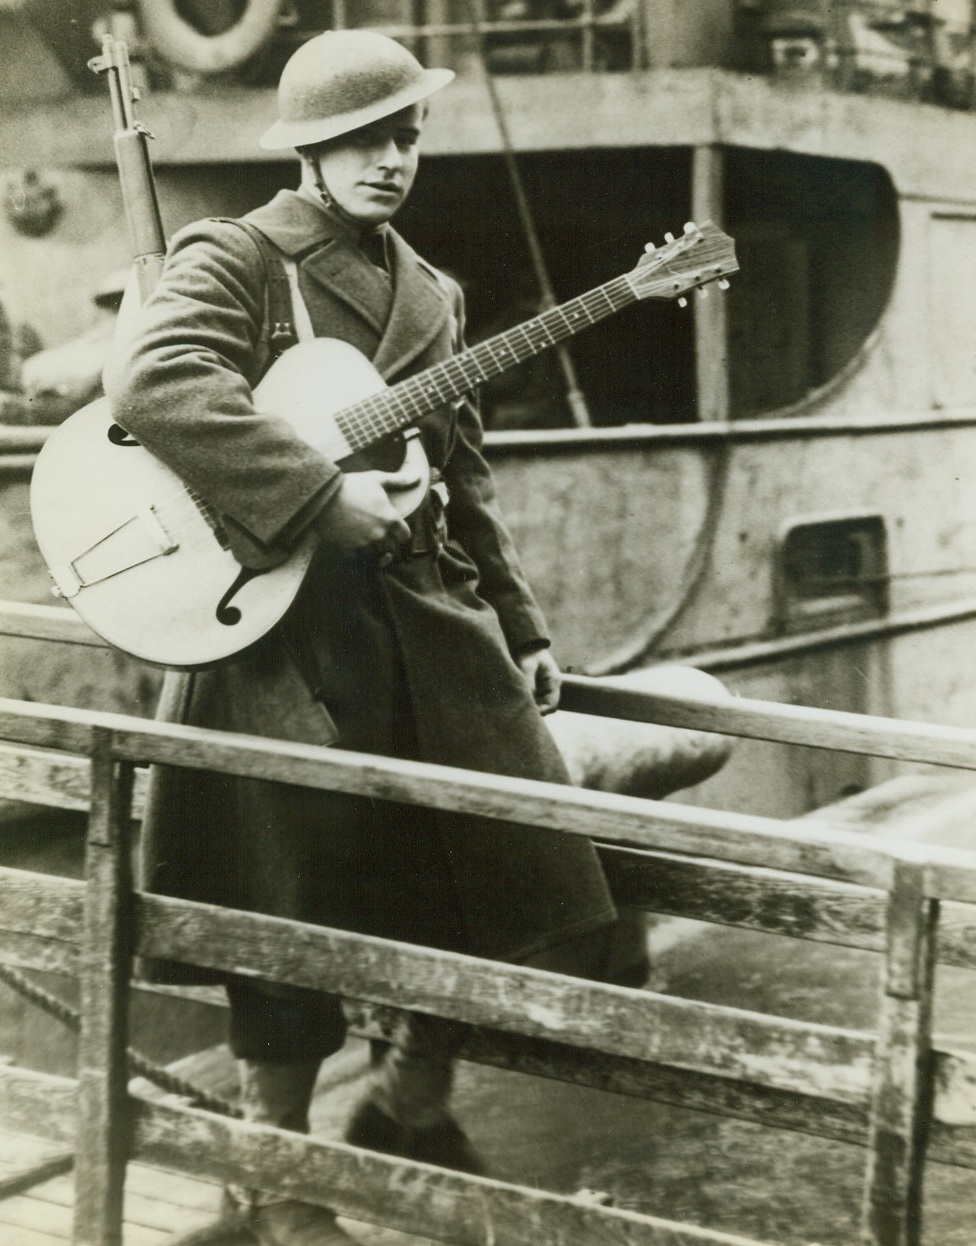 Takes His Music to Ireland, 2/8/1942. Northern Ireland - Pvt. Roy A. Brown, of Waterloo, Iowa, took his guitar along when he went to Northern Ireland with the first contingent of U.S. soldiers to set foot in the British Isles during World War II, and he carries it tenderly as he leaves the transport which brought him and his mates across the sub-infested Atlantic. Passed by Censors. Credit: ACME;